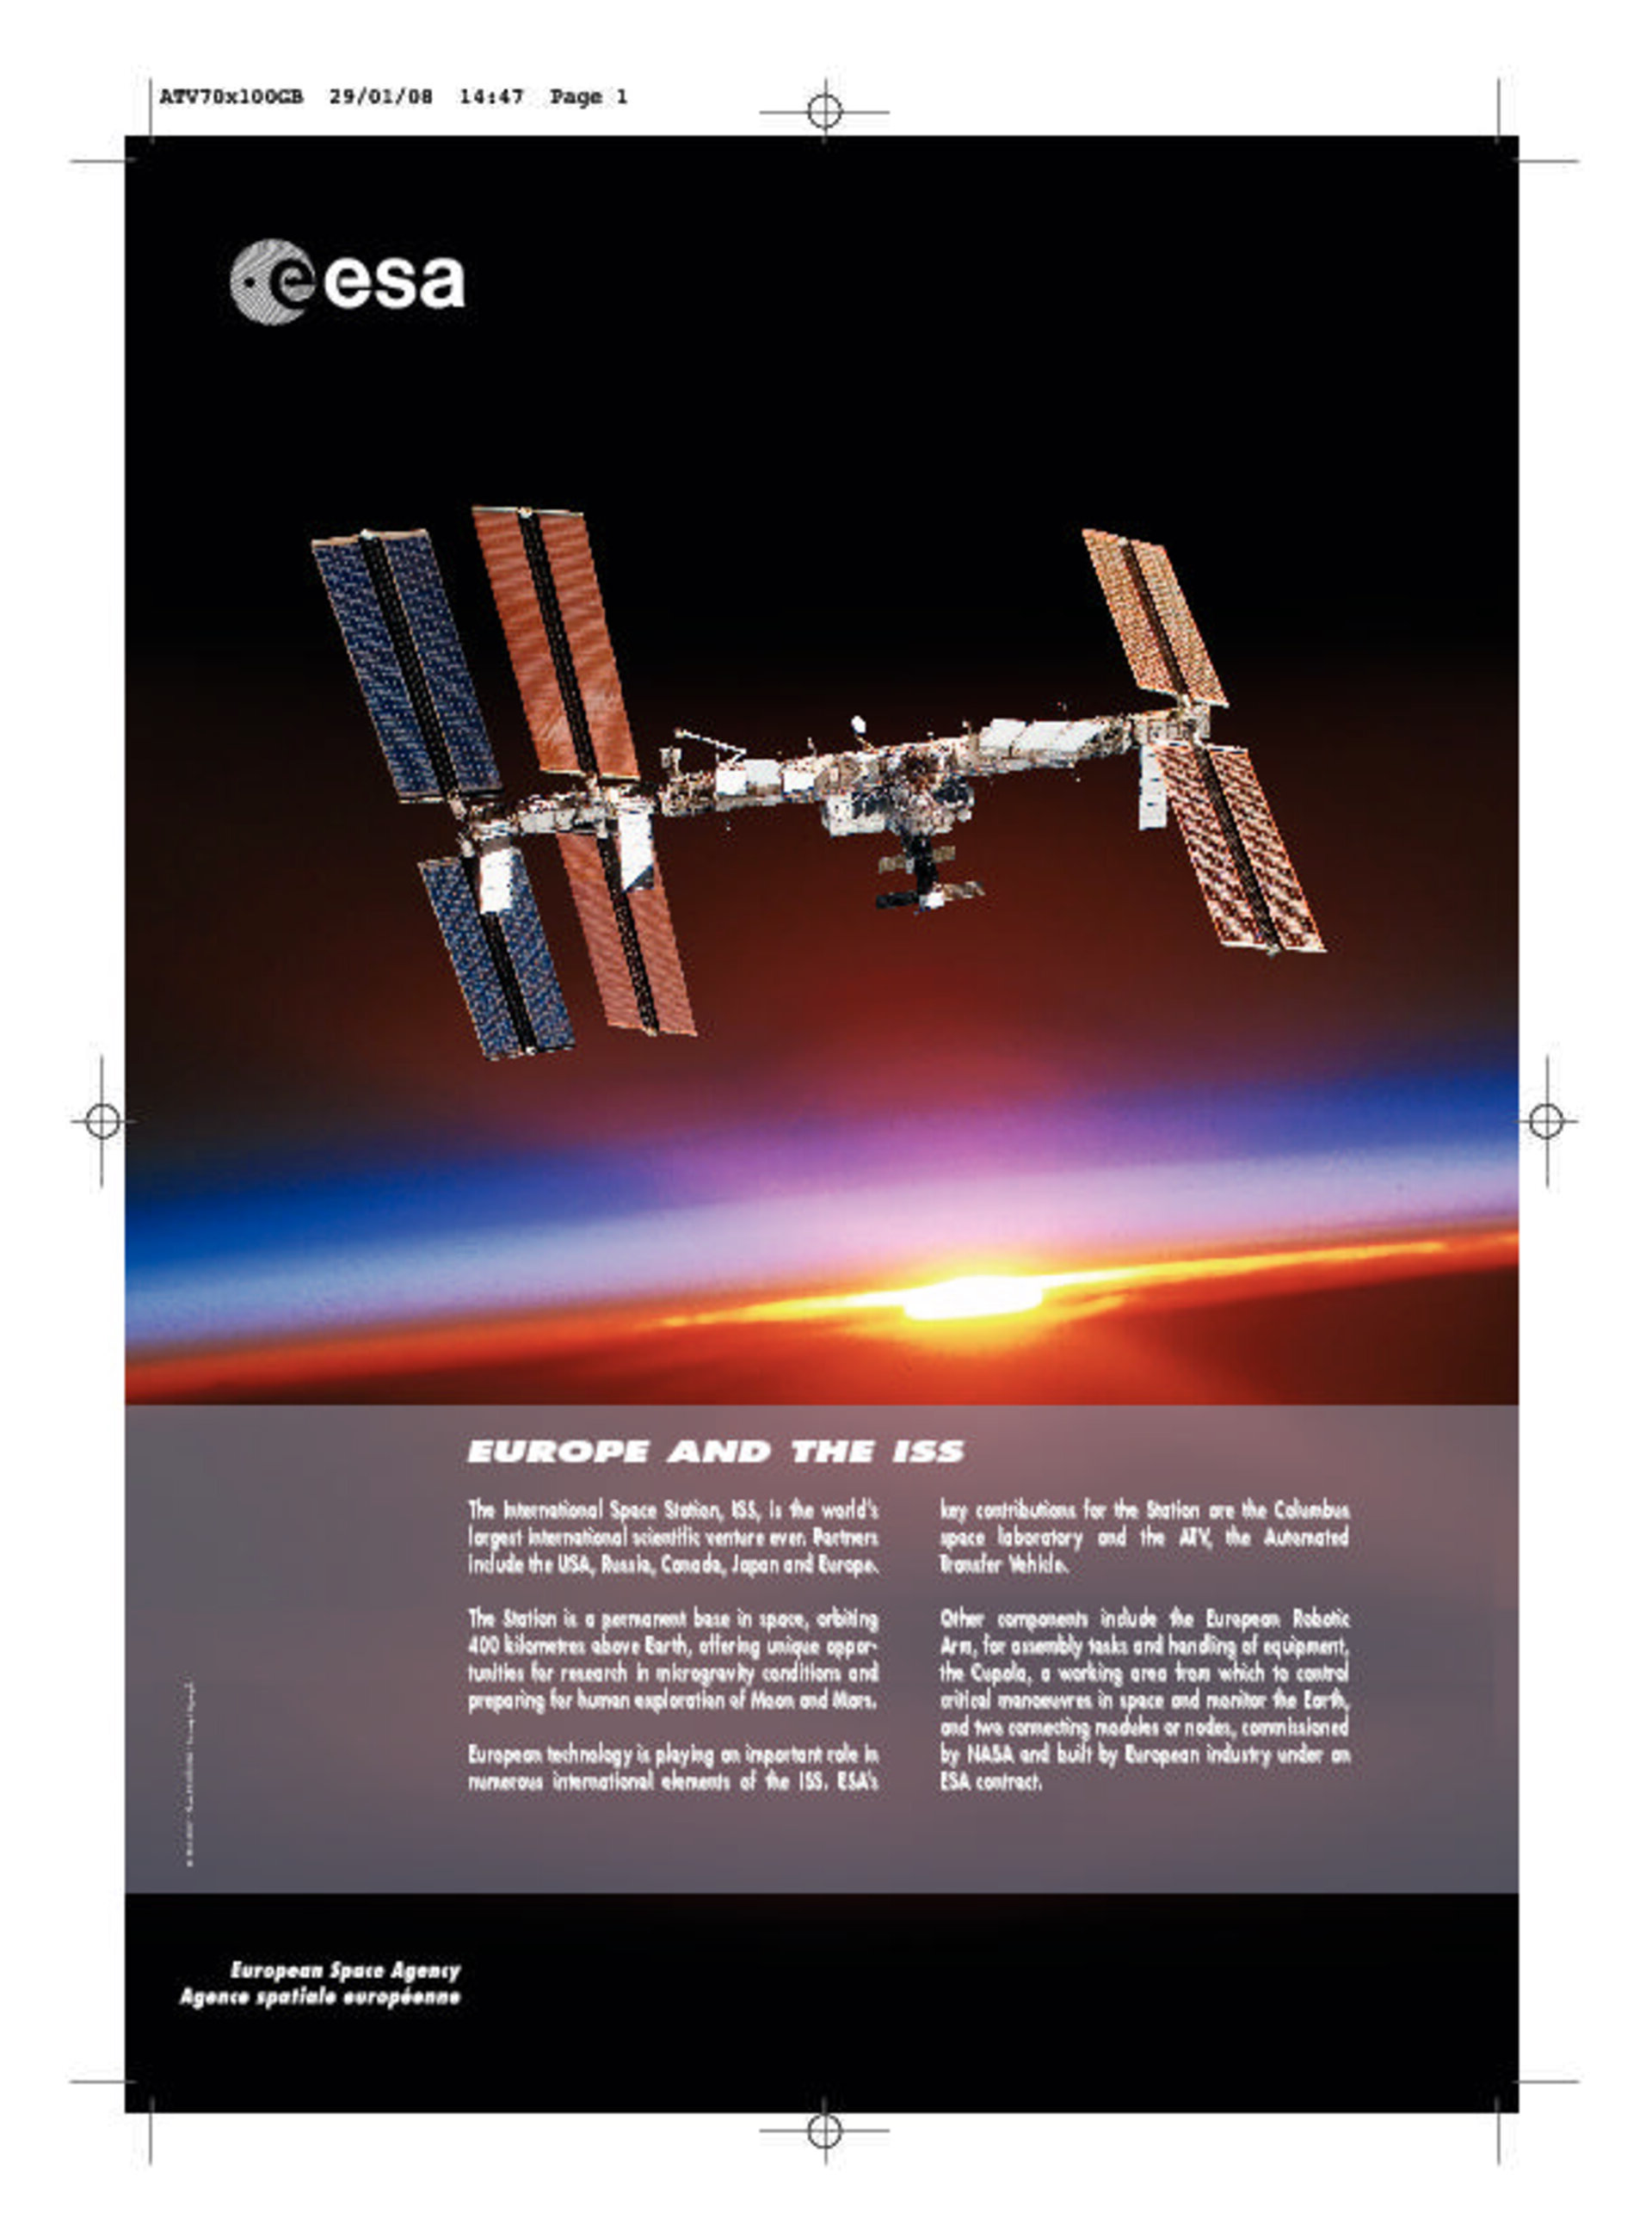 Poster - Europe and the ISS